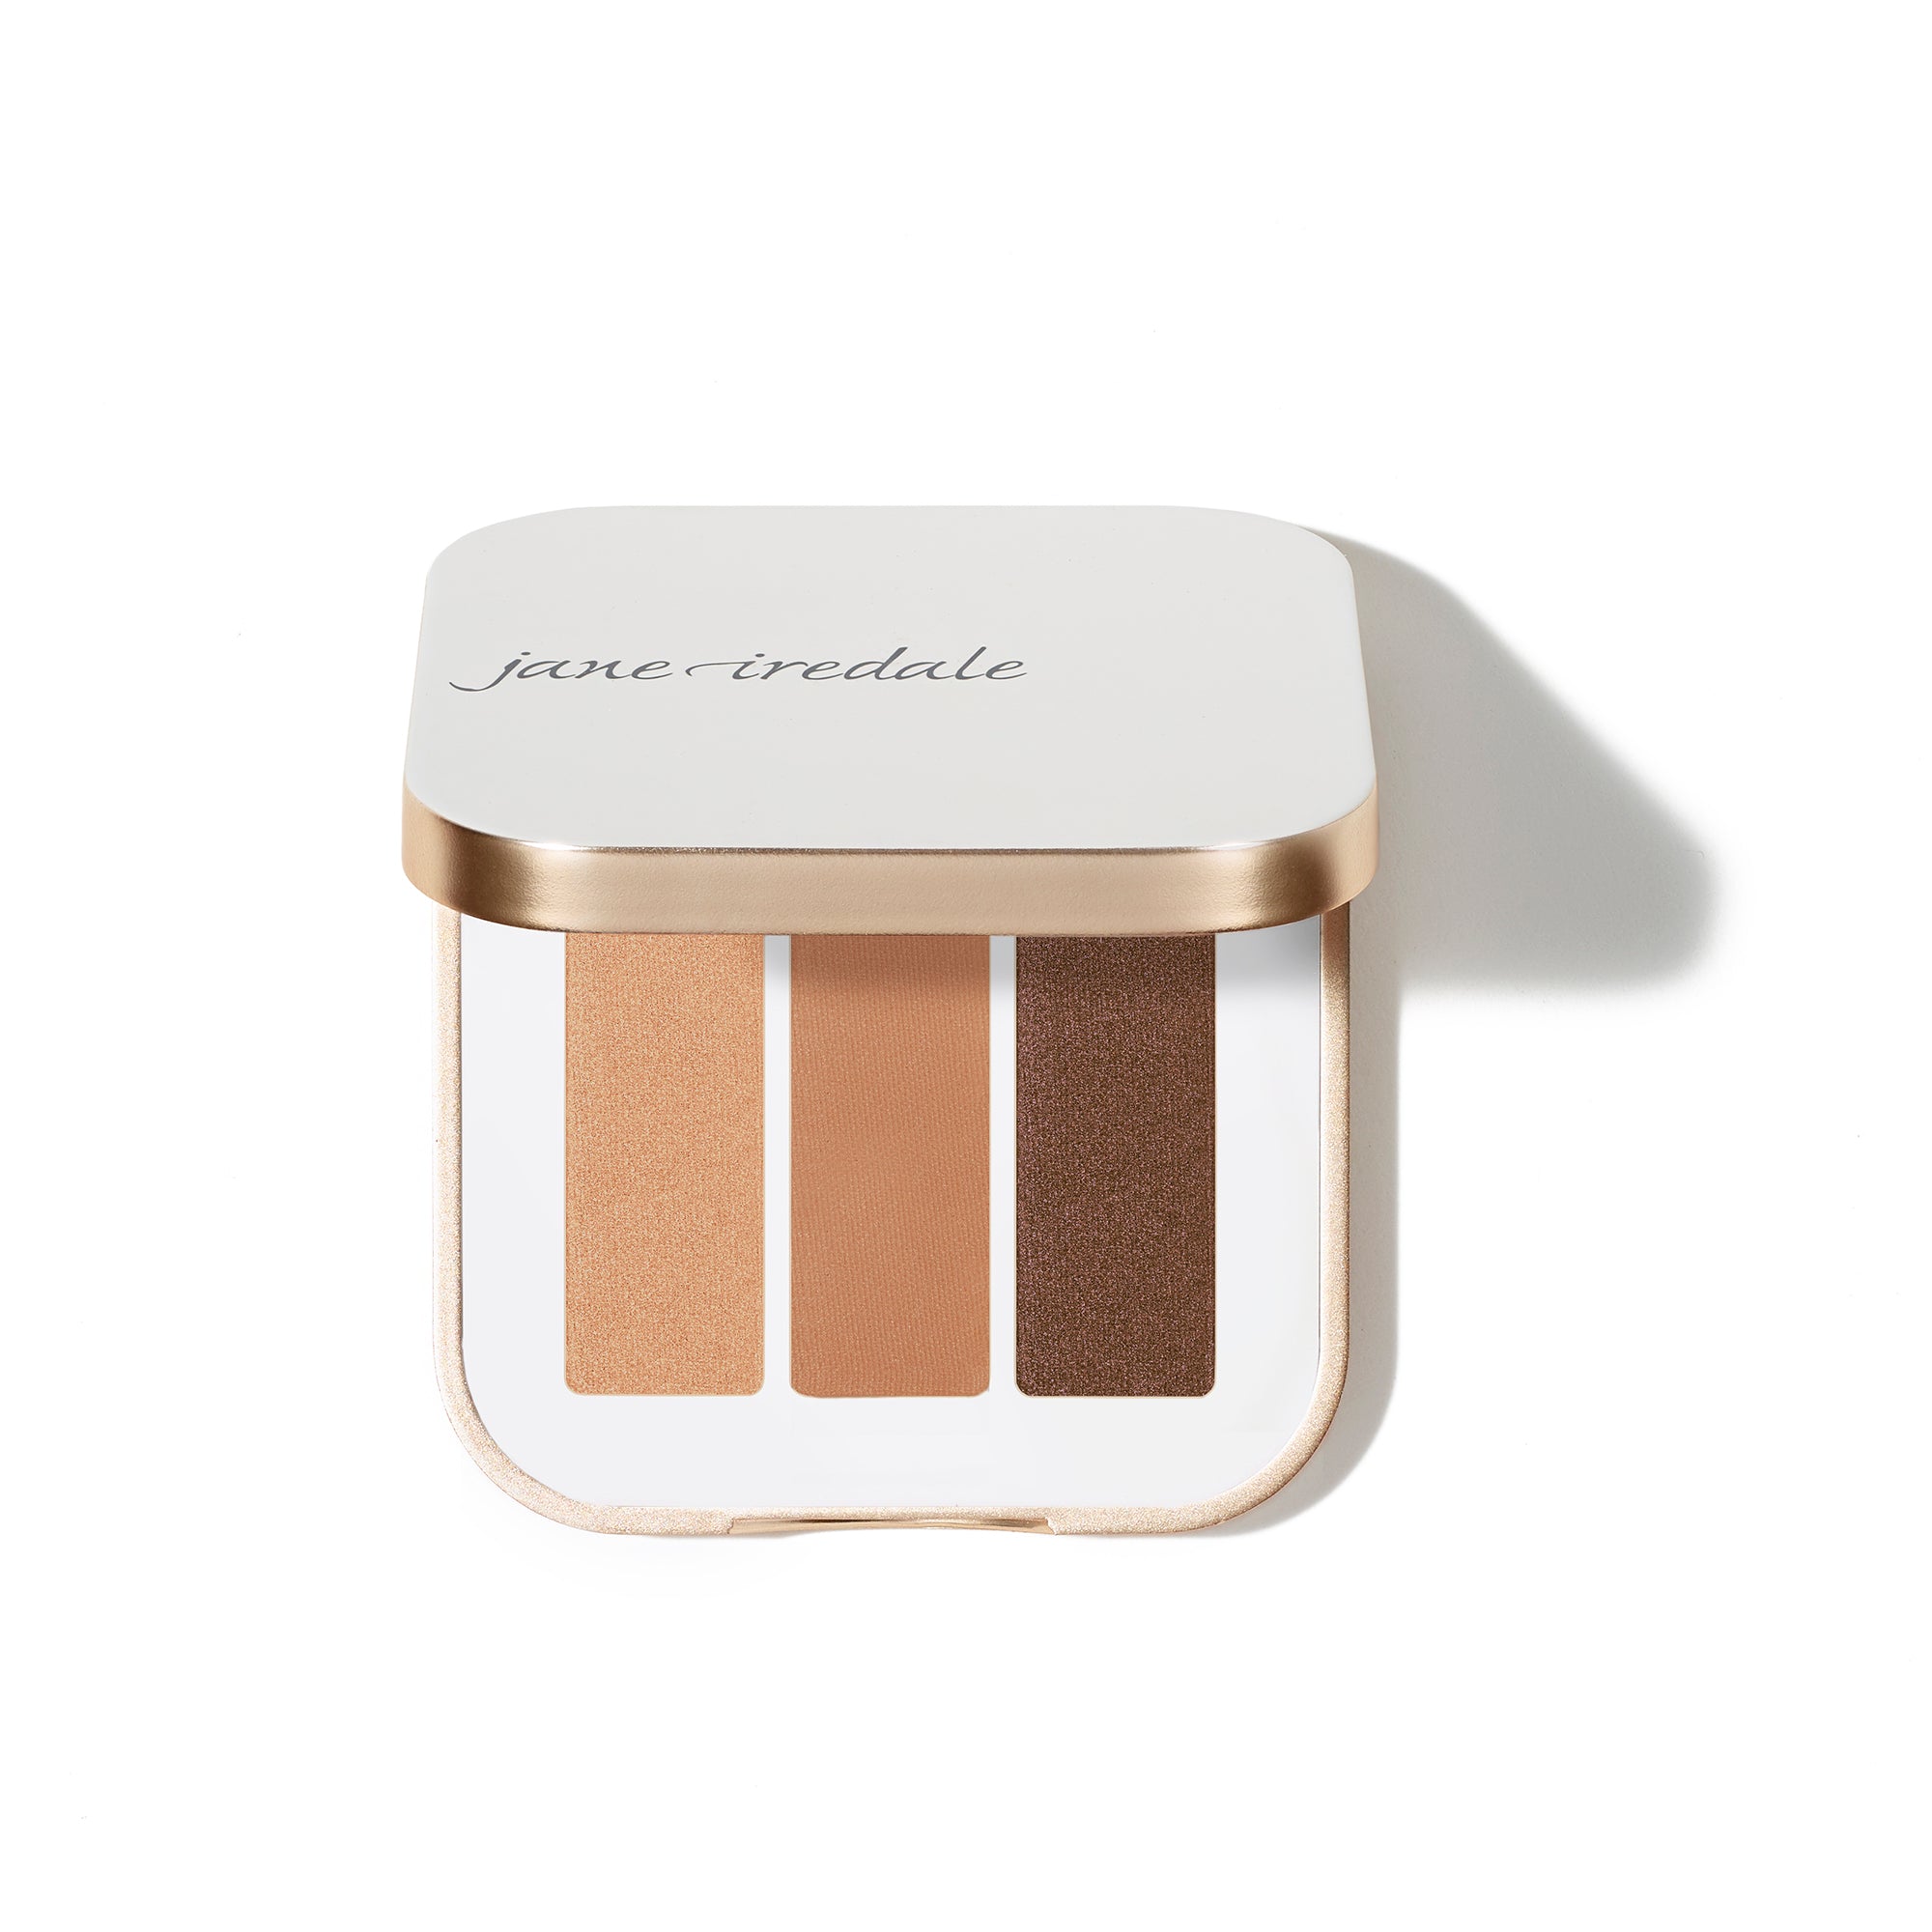 Jane Iredale PurePressed Eye Shadow Triple - Limited Edition 30th Anniversary Collection / Honeysuckle